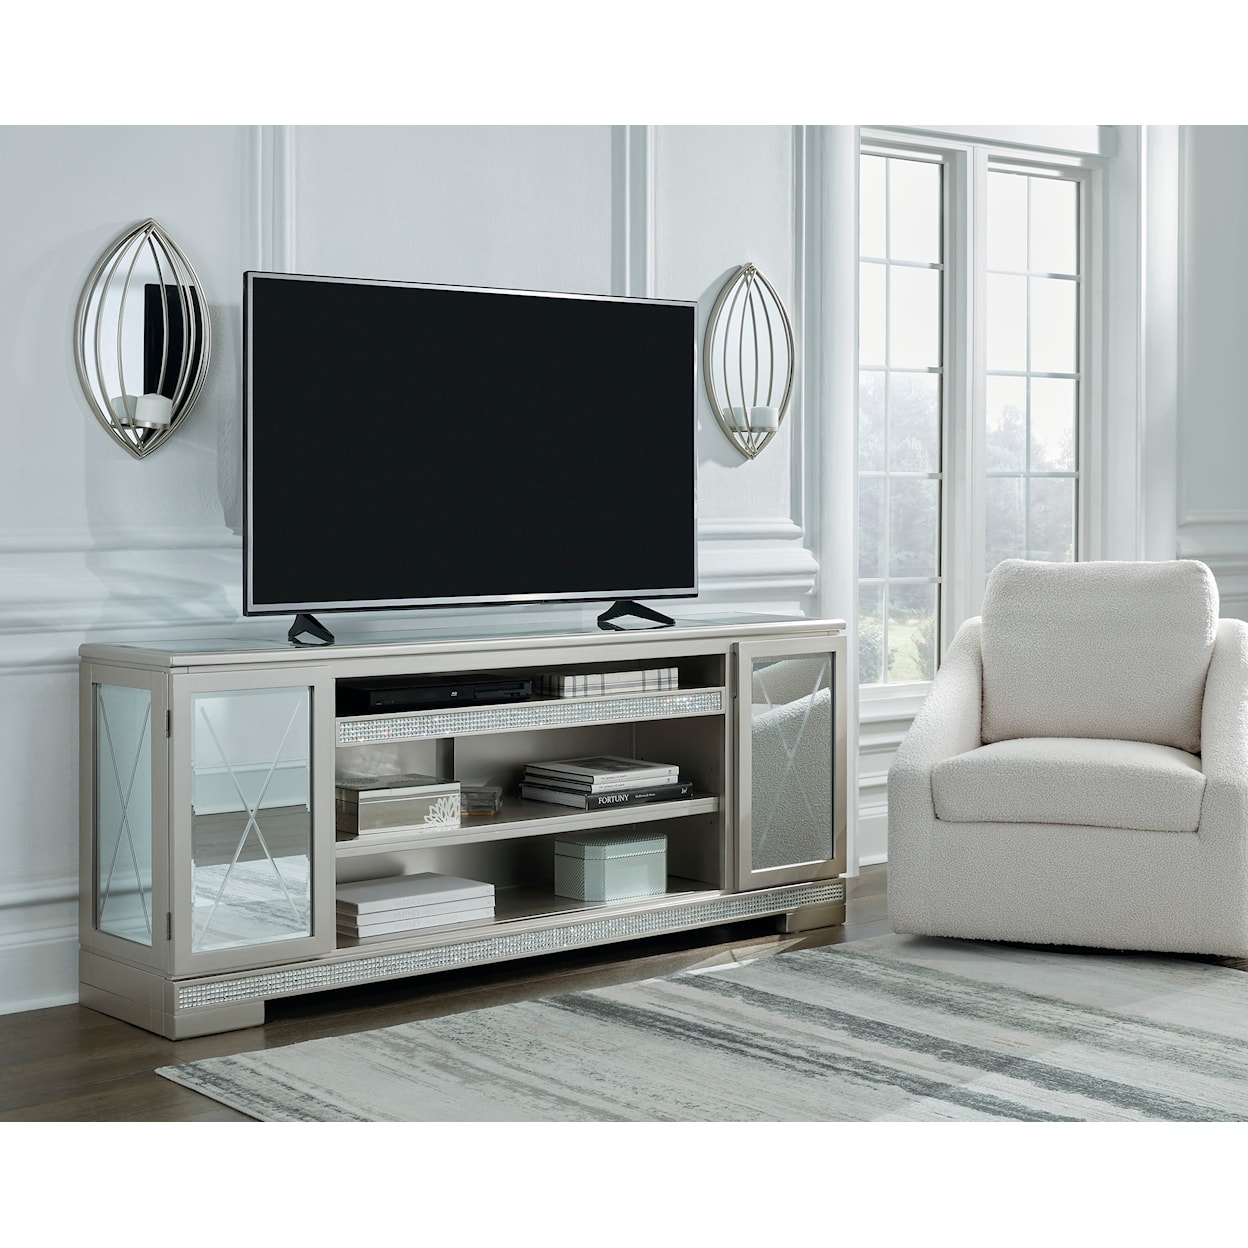 Benchcraft Flamory 72" TV Stand